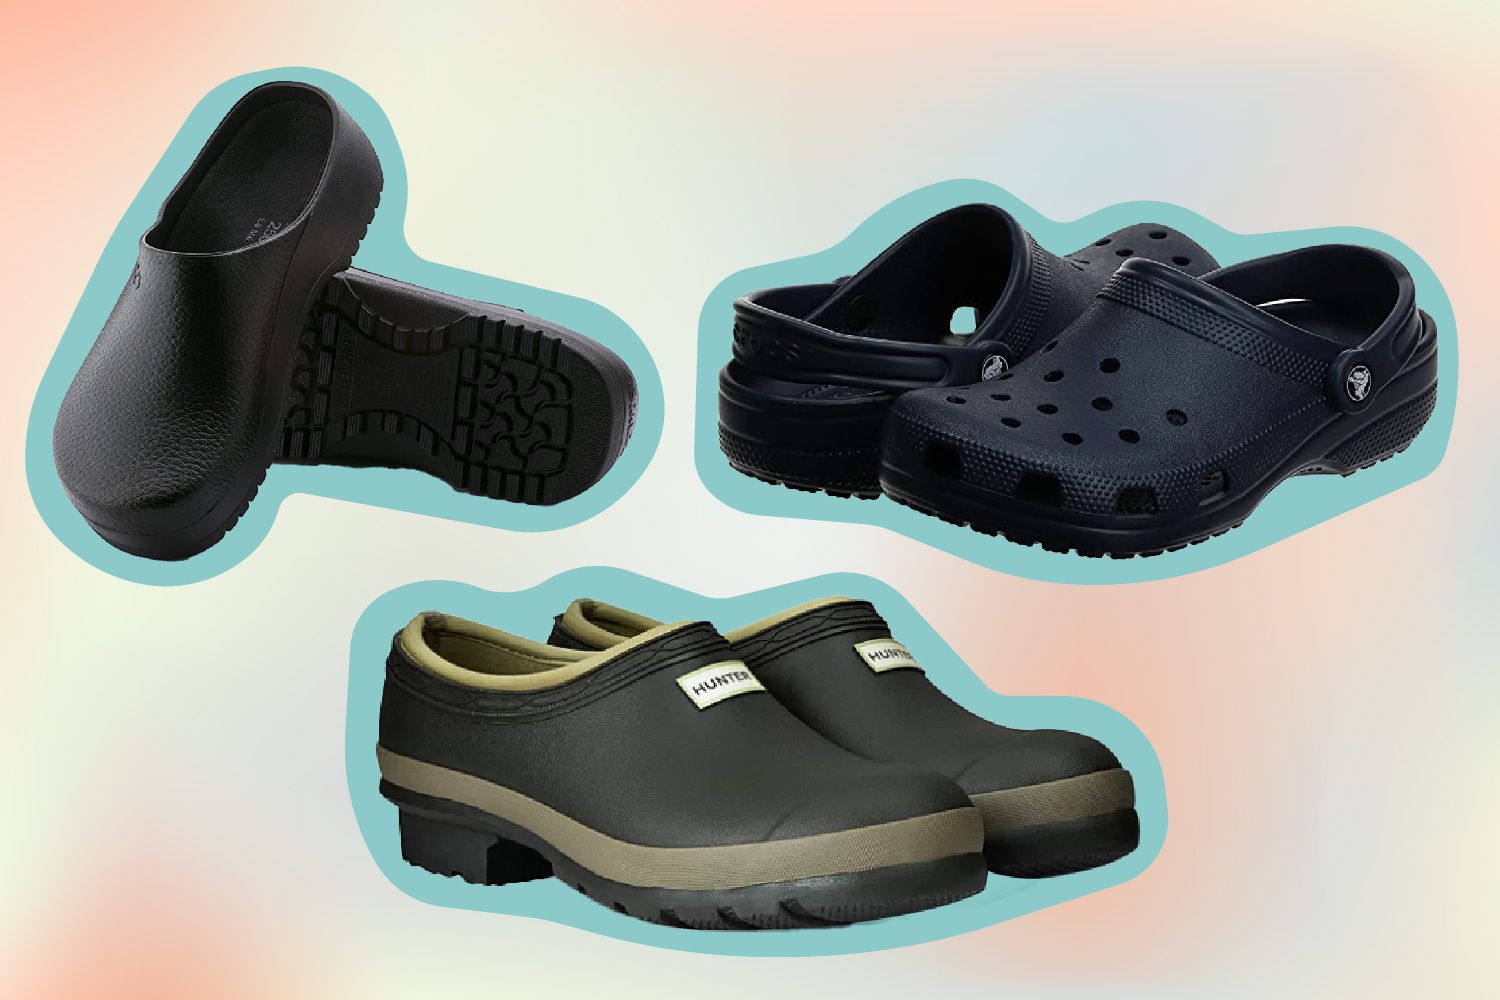 Stay Comfortable With the Best Gardening Shoes You Can Buy